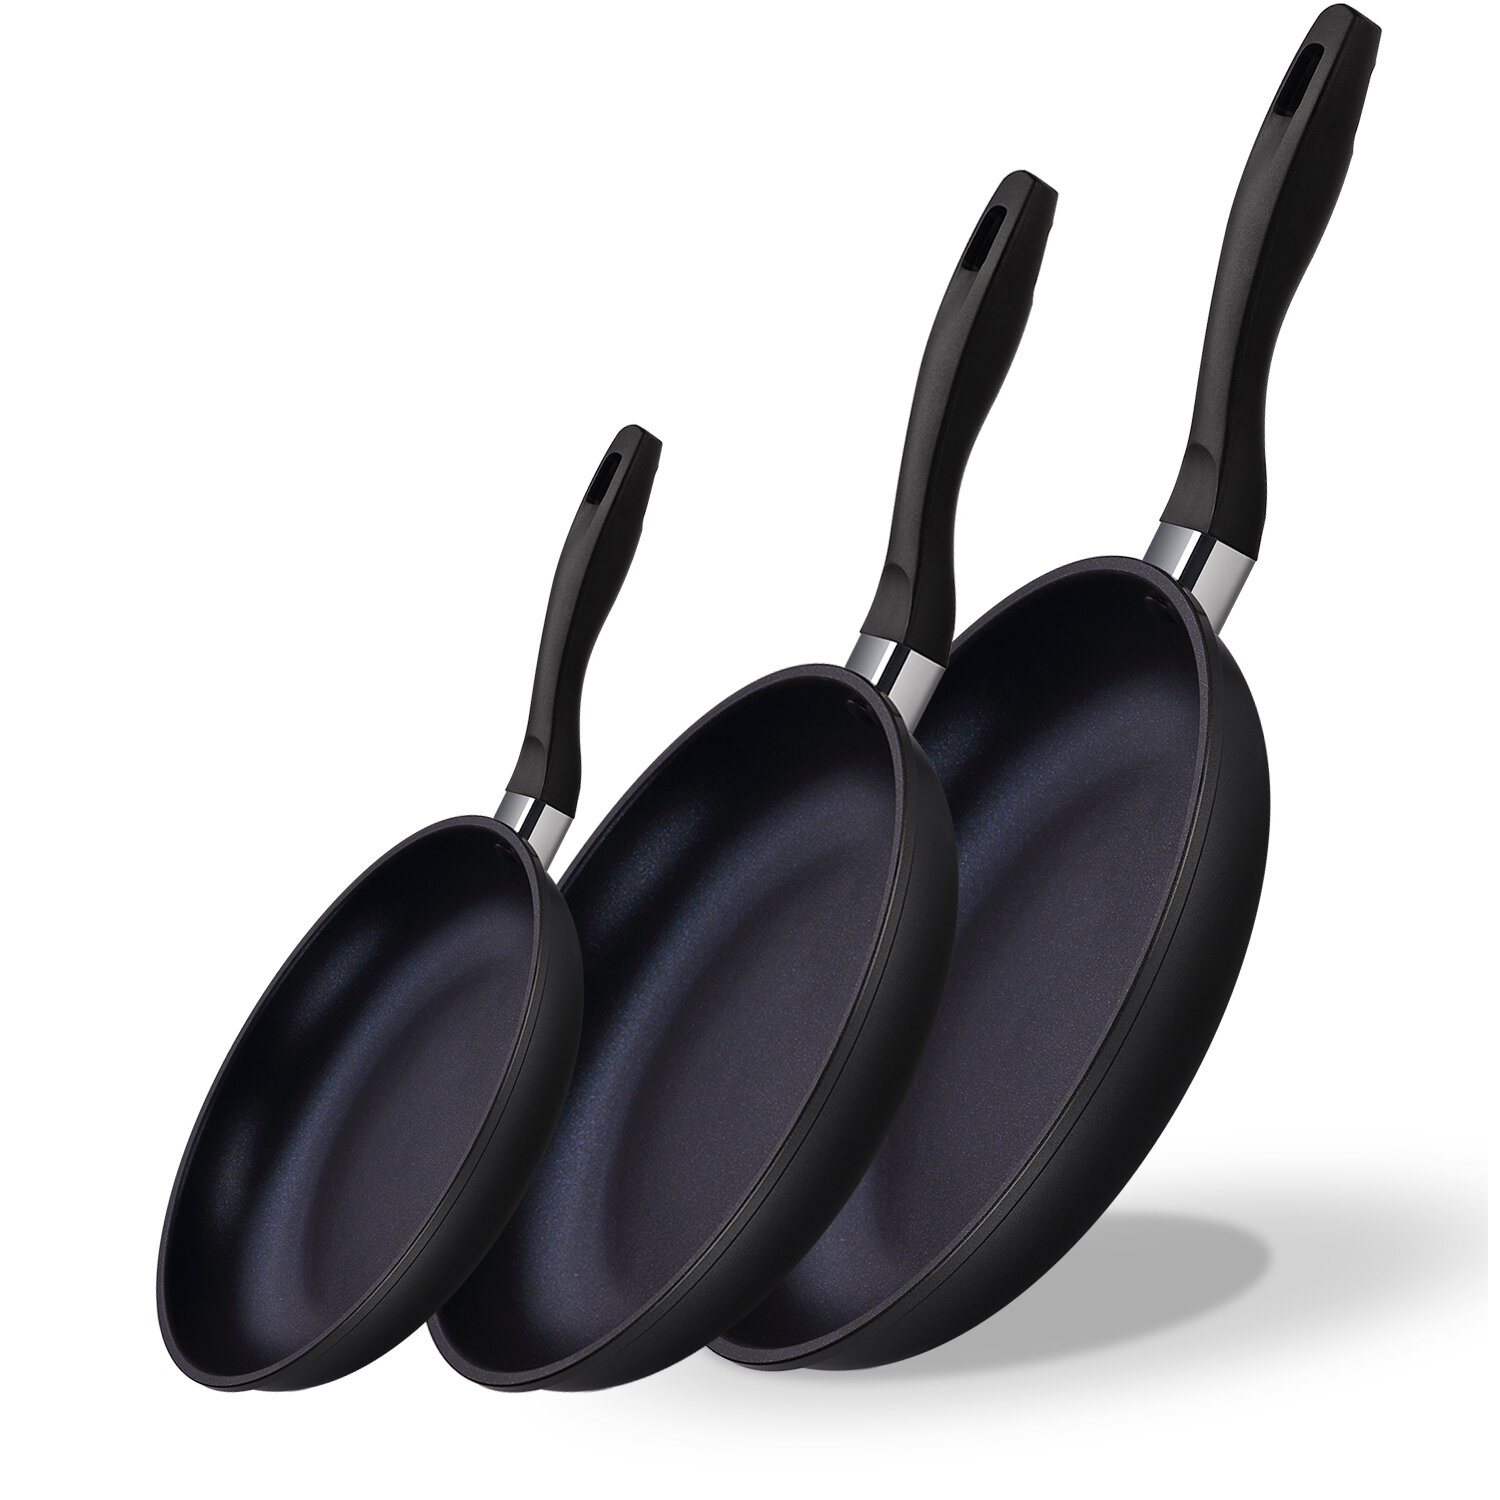 All-Clad all clad non stick omelette pans set of 2 skillet 8 9.5 inch 